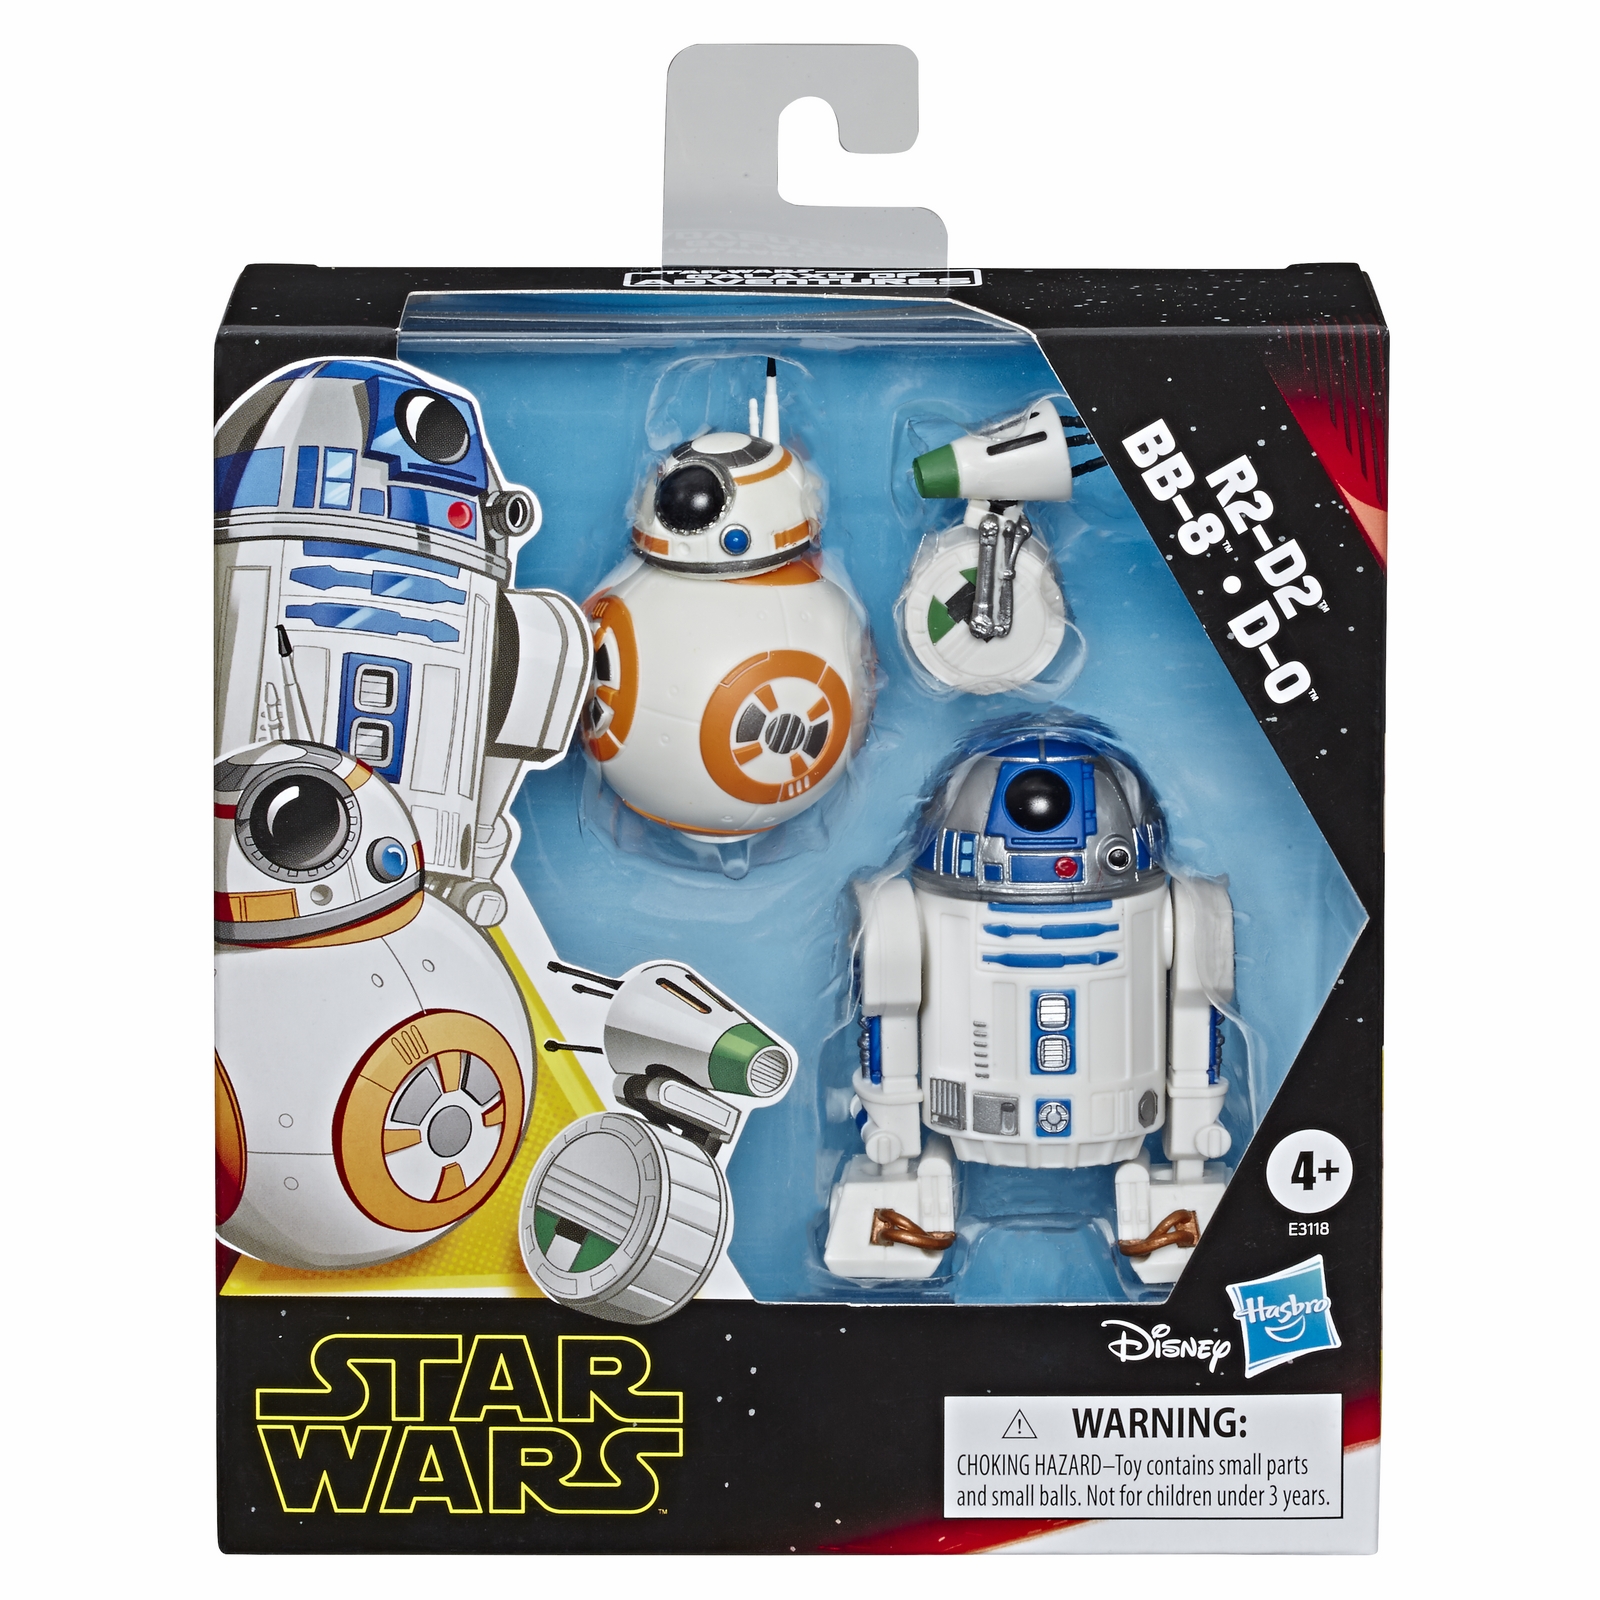 STAR WARS GALAXY OF ADVENTURES 5-INCH R2-D2, BB-8, & D-O DROID 3-PACK - in pck.jpg